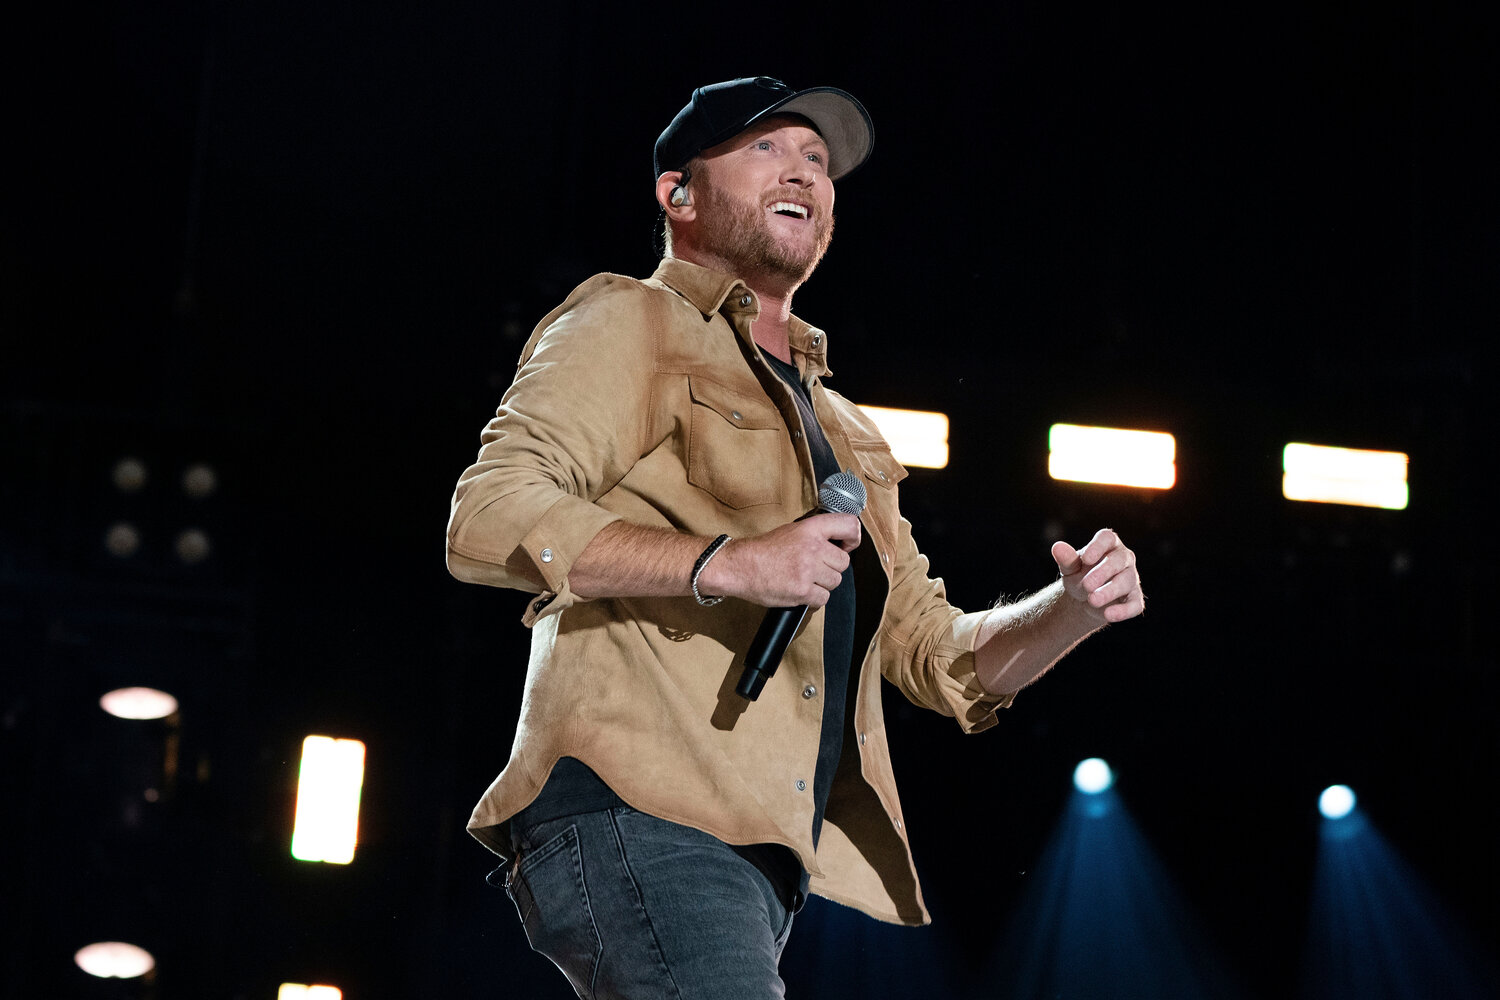 Cole Swindell performs during CMA Fest on June 10, 2022, at Nissan Stadium in Nashville, Tennessee.